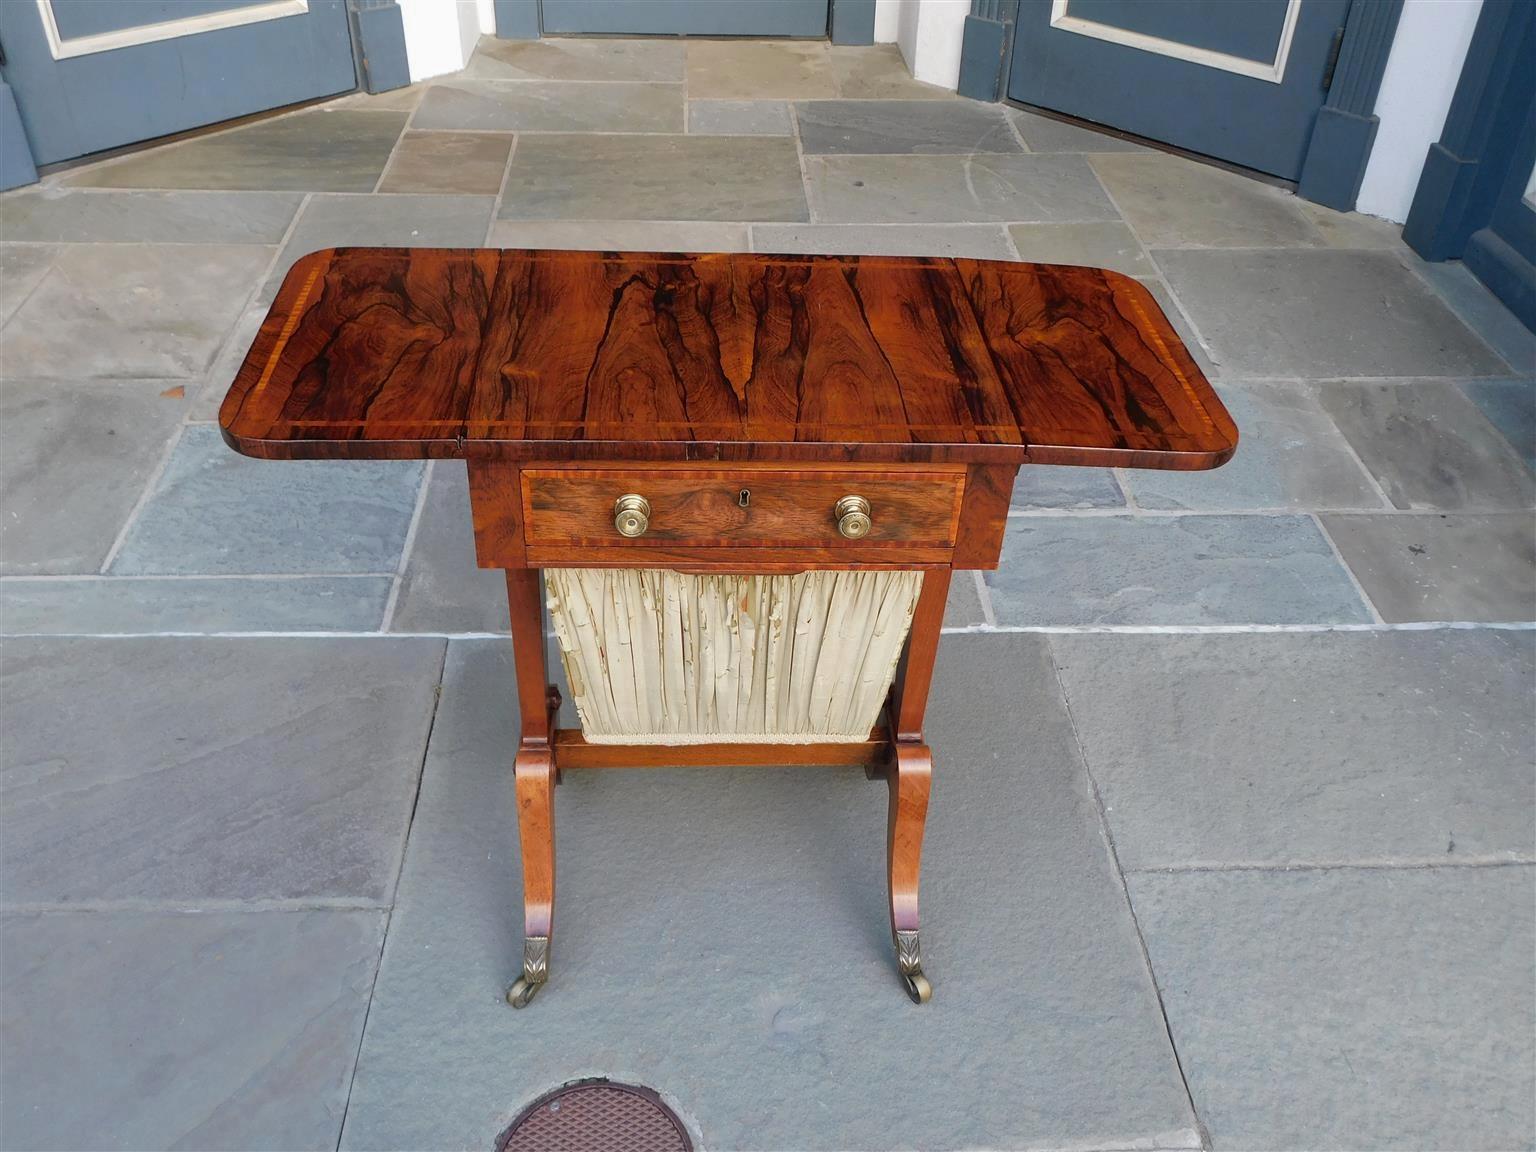 English Regency Kingswood One Drawer Inlaid Sewing Table with Orig. Casters 1810 For Sale 3